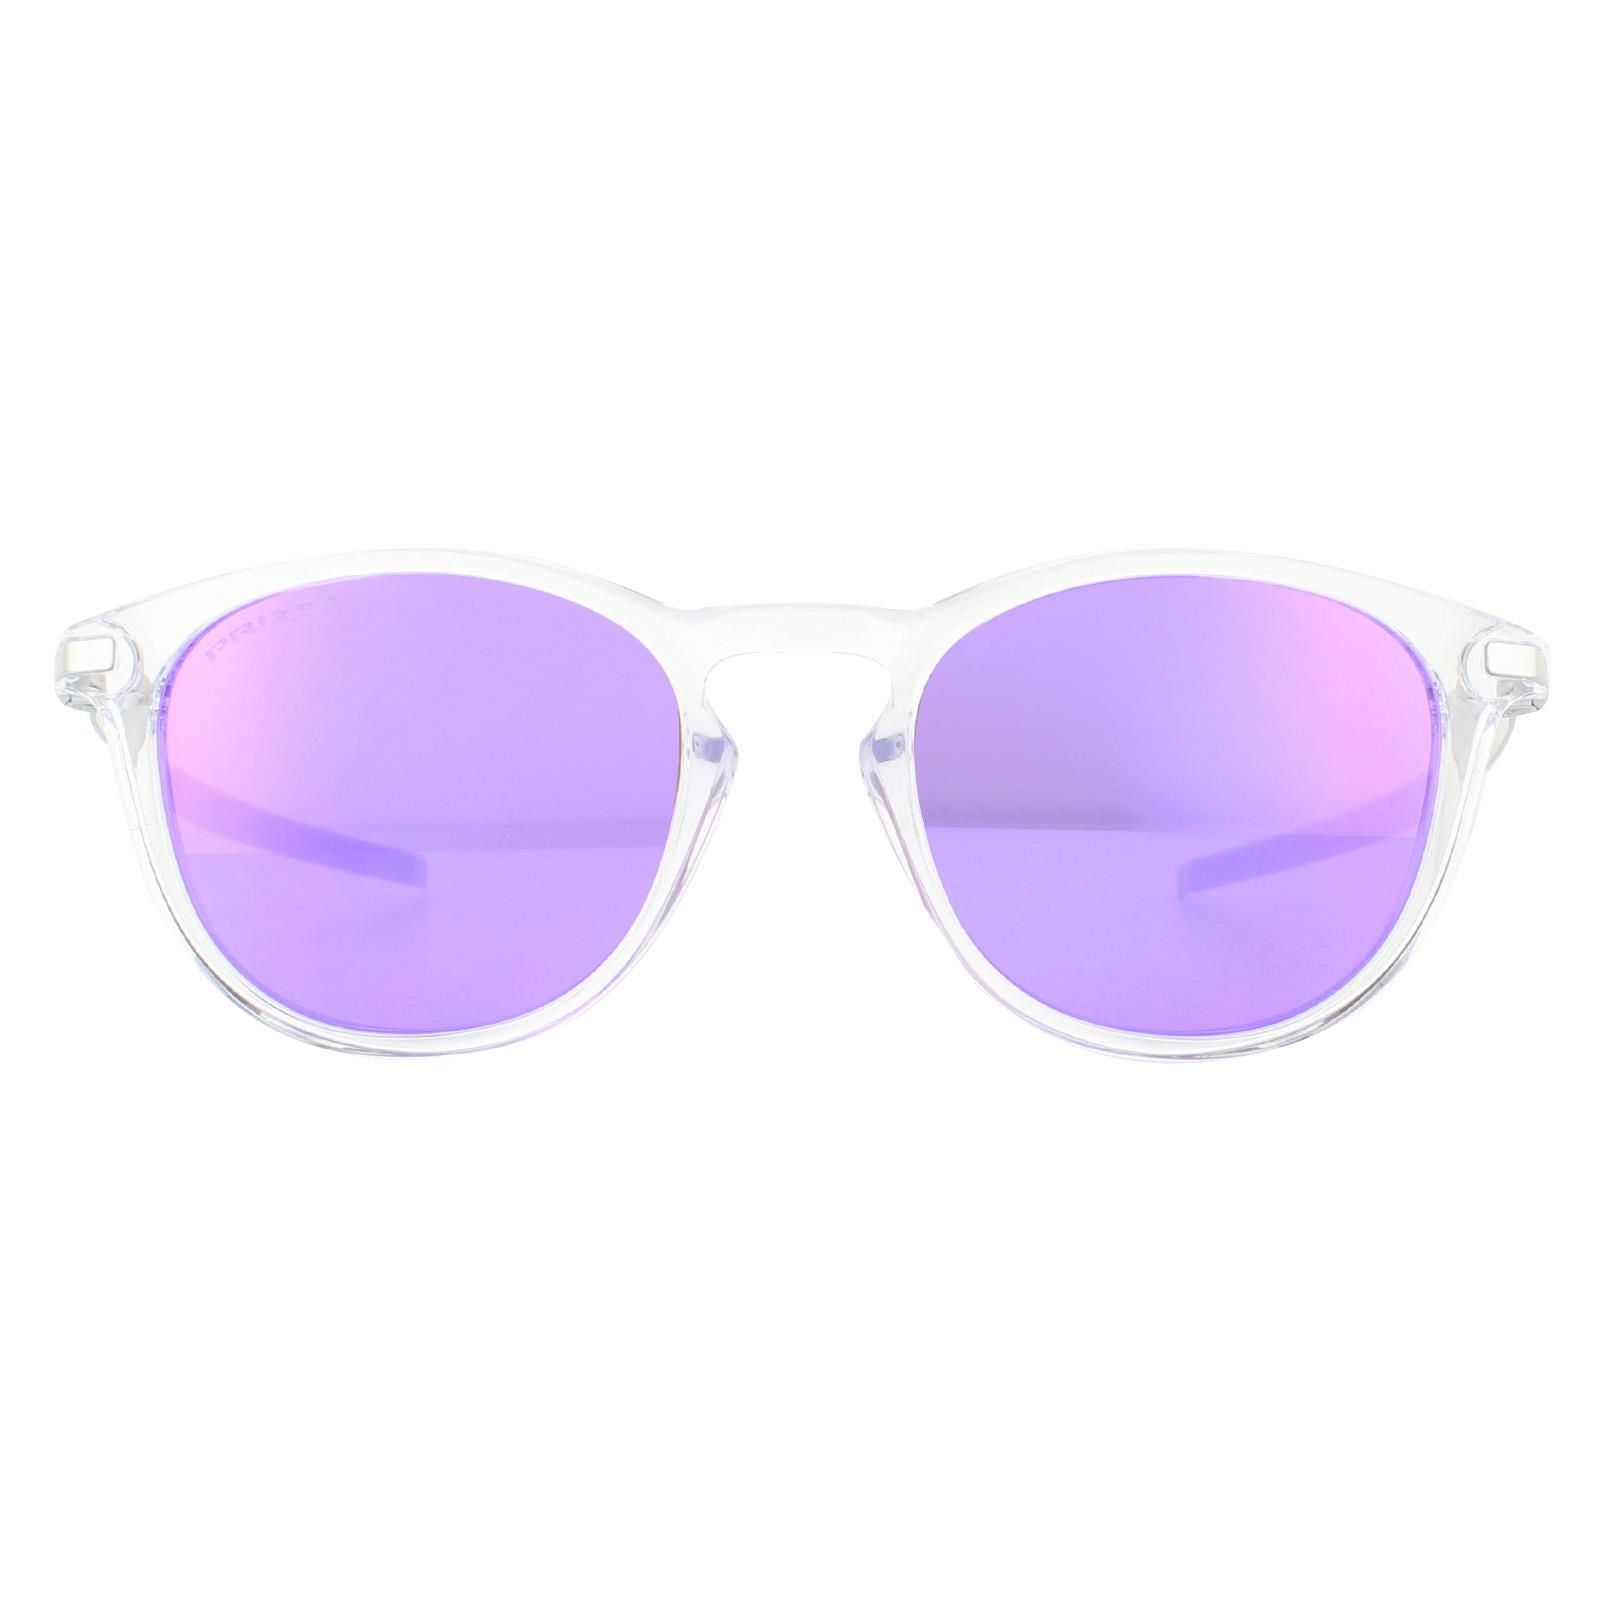 Oakley Sunglasses Pitchman R OO9439-12 Polished Clear Prizm Violet are a lightweight model made of plastic, with a rounded silhouette and sleek temples, suitable for small to medium faces, boasting durability and all-day comfort of lightweight O Matterâ„¢